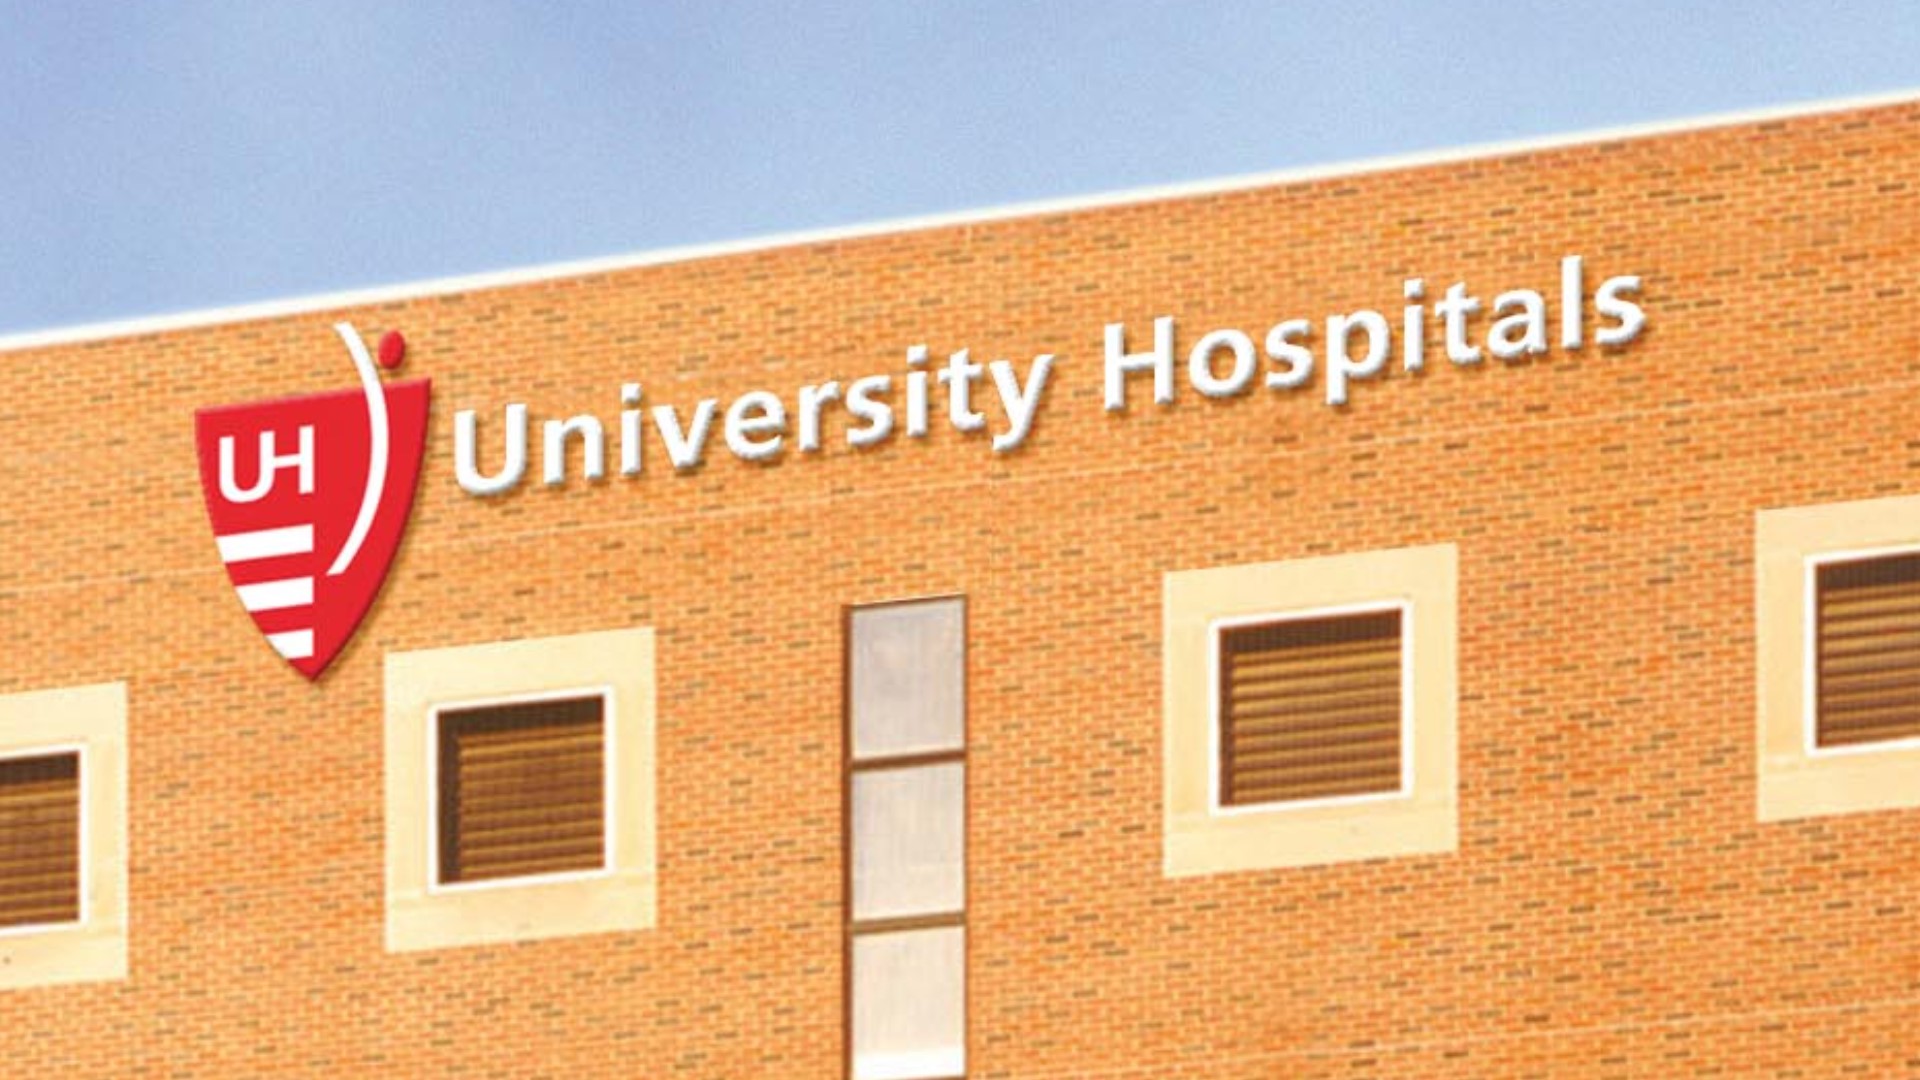 On Aug. 12, University Hospitals will close the inpatient and emergency departments at both UH Richmond and Bedford Medical Centers.